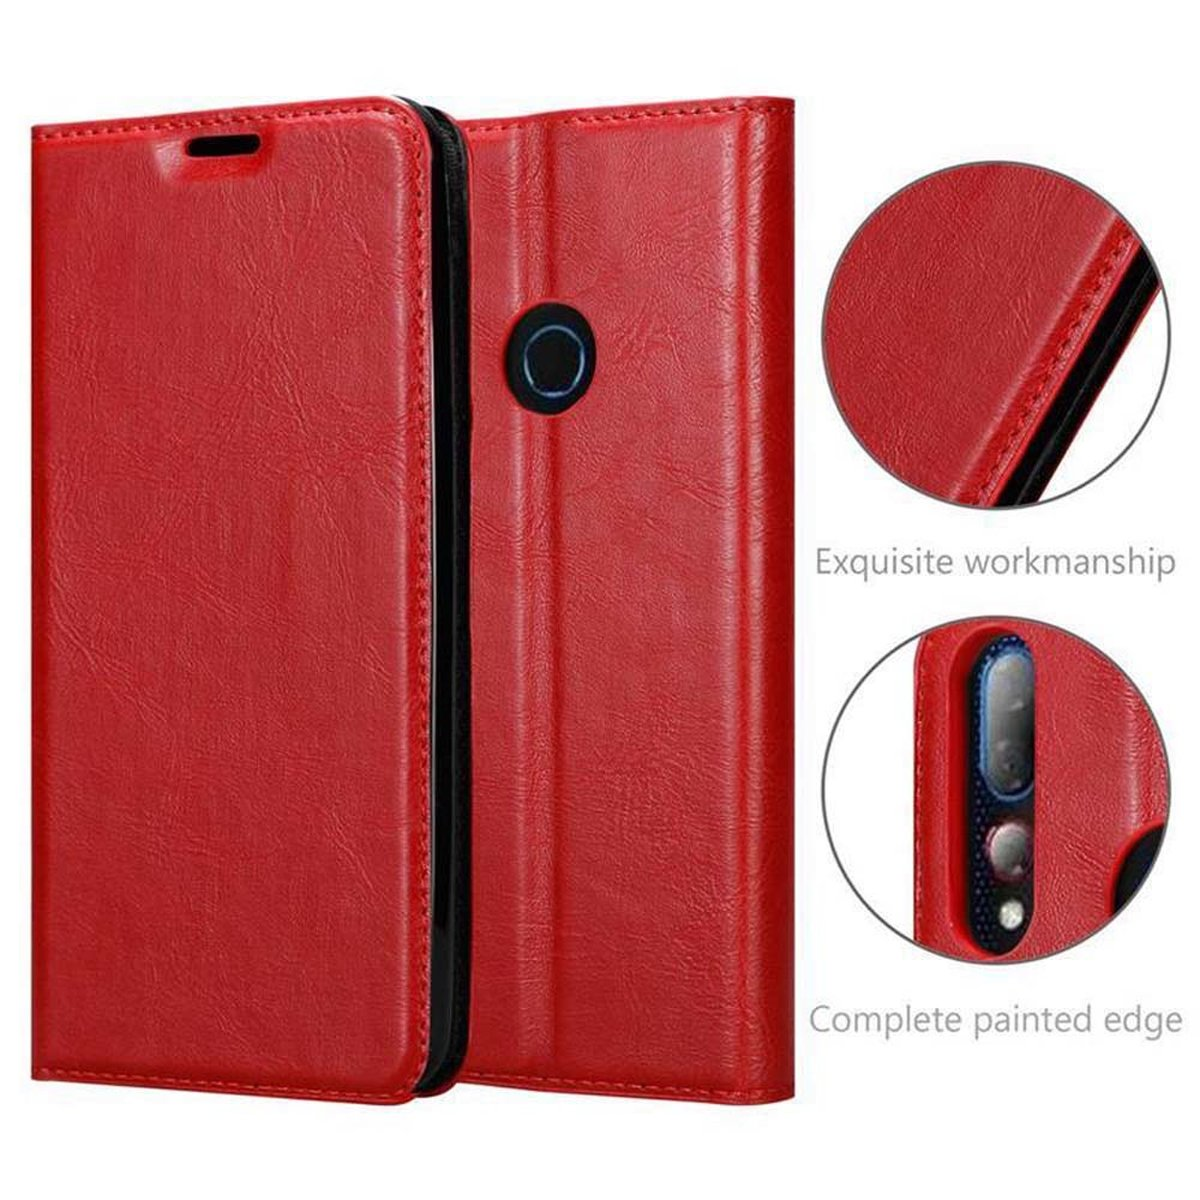 Desire PLUS, Magnet, HTC, 19 CADORABO ROT Book Invisible APFEL Hülle Bookcover,